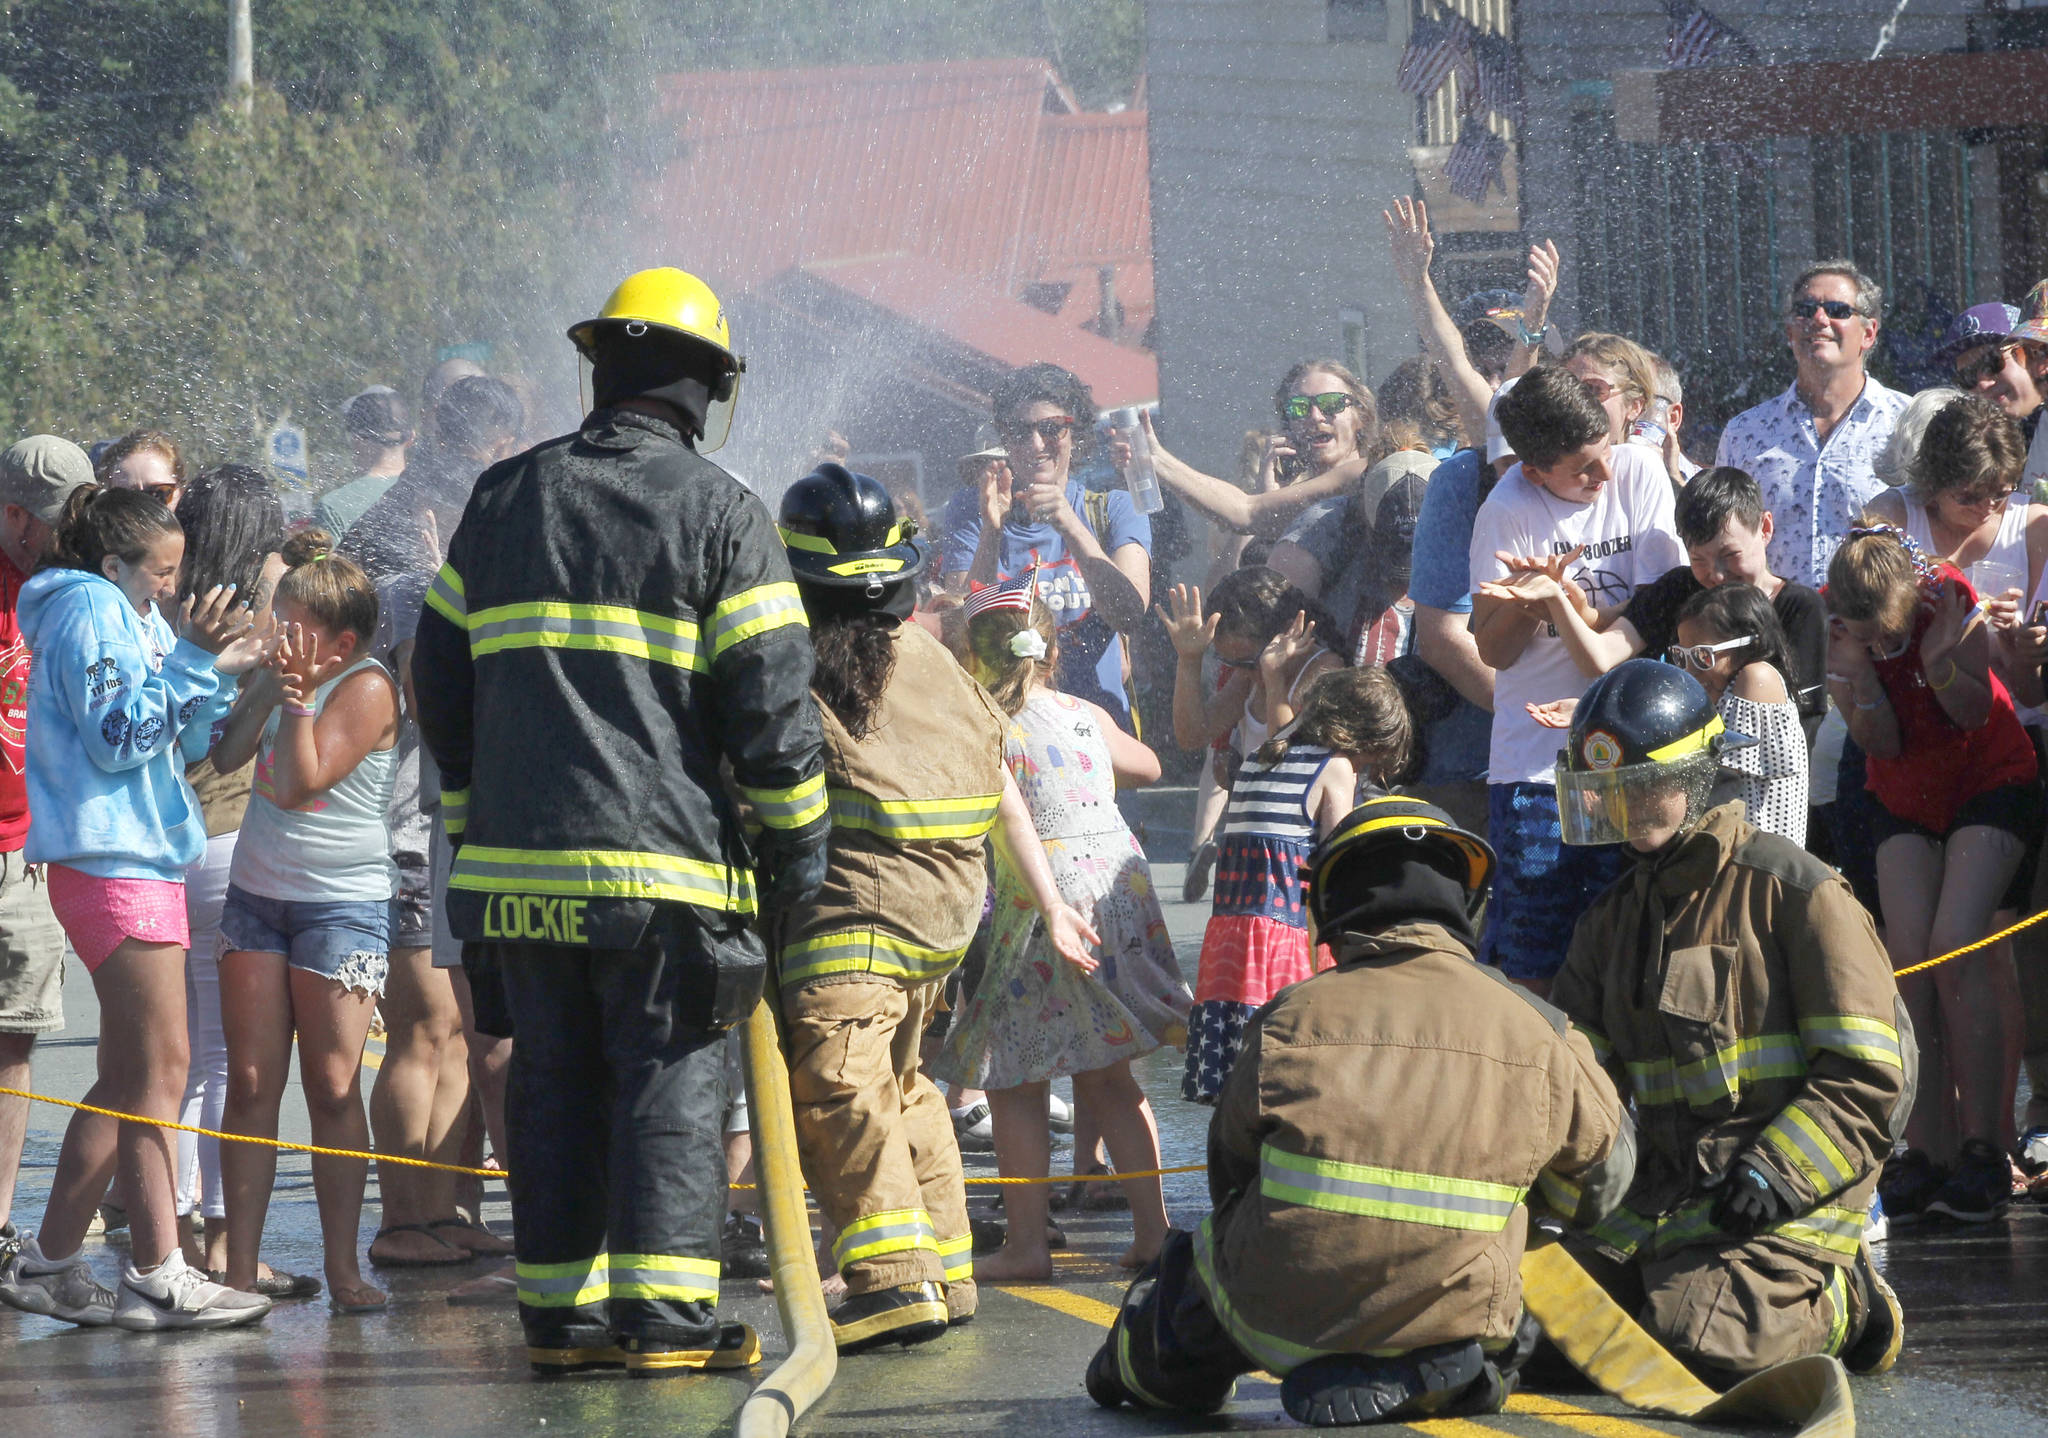 Spectators react as Firefighter Emily Lockie sprays down the crowd at the annual Make & Break hose race in Douglas on Wednesday, July 4, 2018. (Alex McCarthy | Juneau Empire)